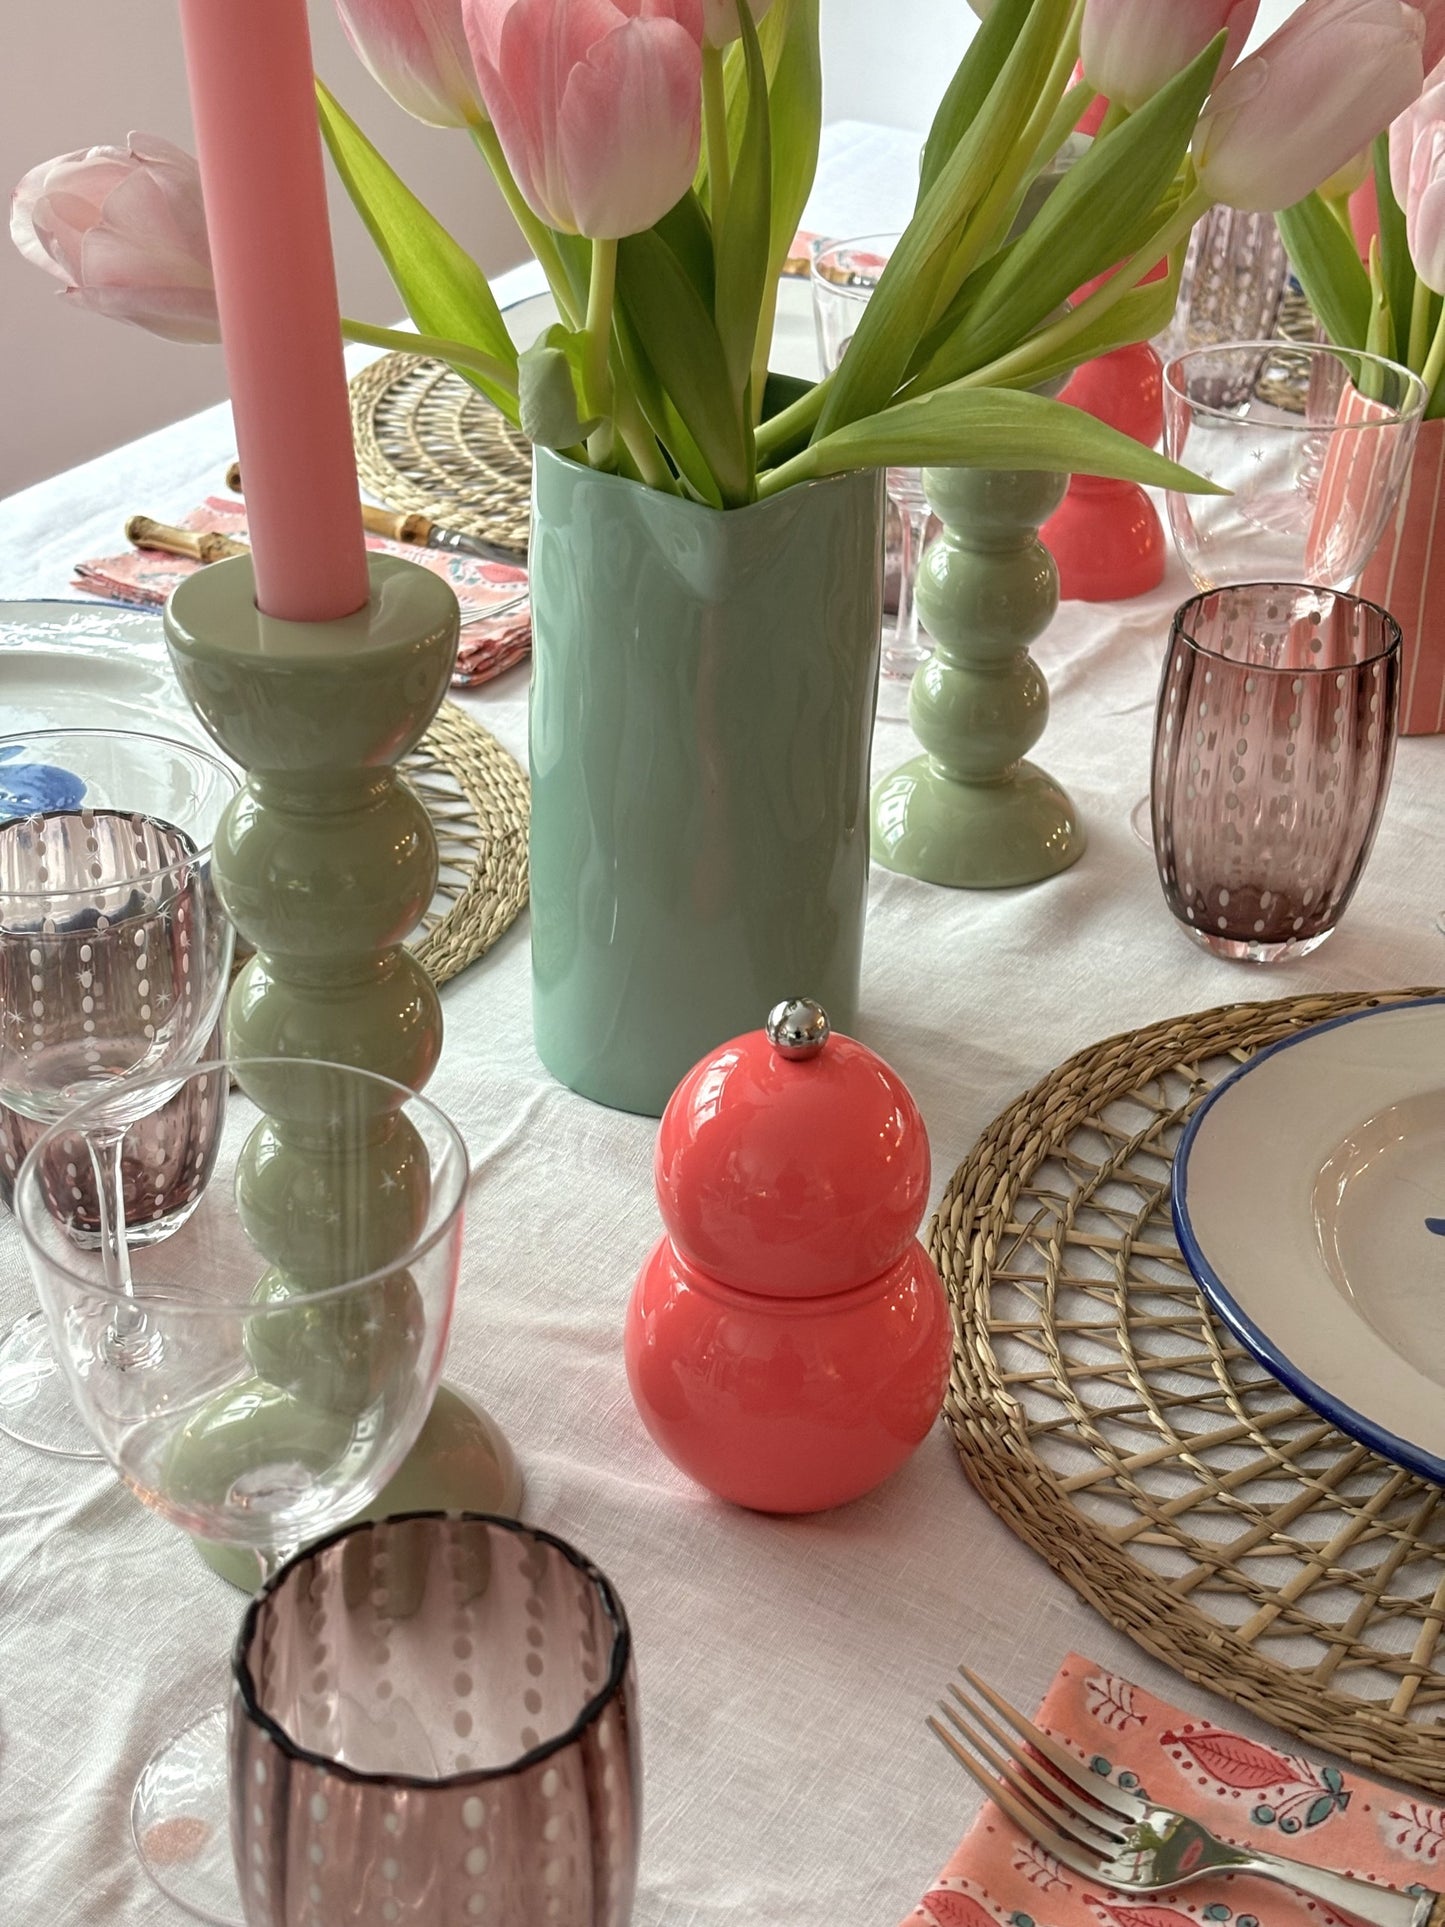 A pink and green table setting featuring green bobbin candlesticks and a green jug filled with tulips.